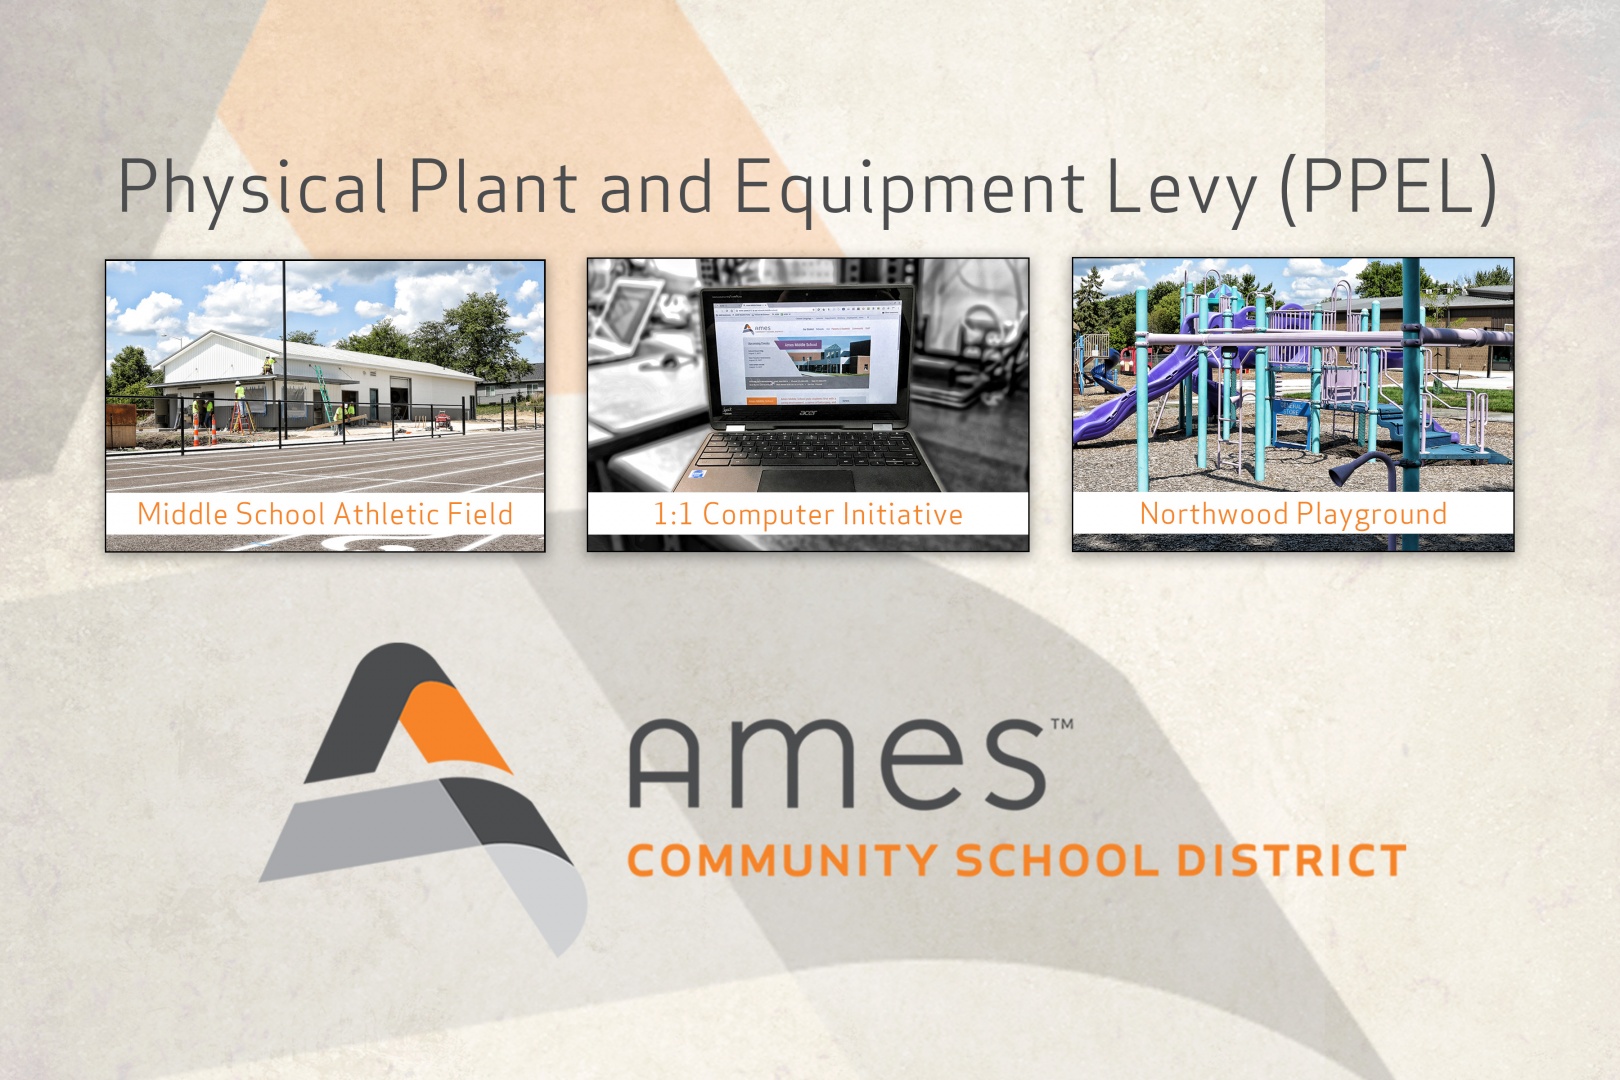 A Guide to Understanding the Physical Plant and Equipment Levy (PPEL)